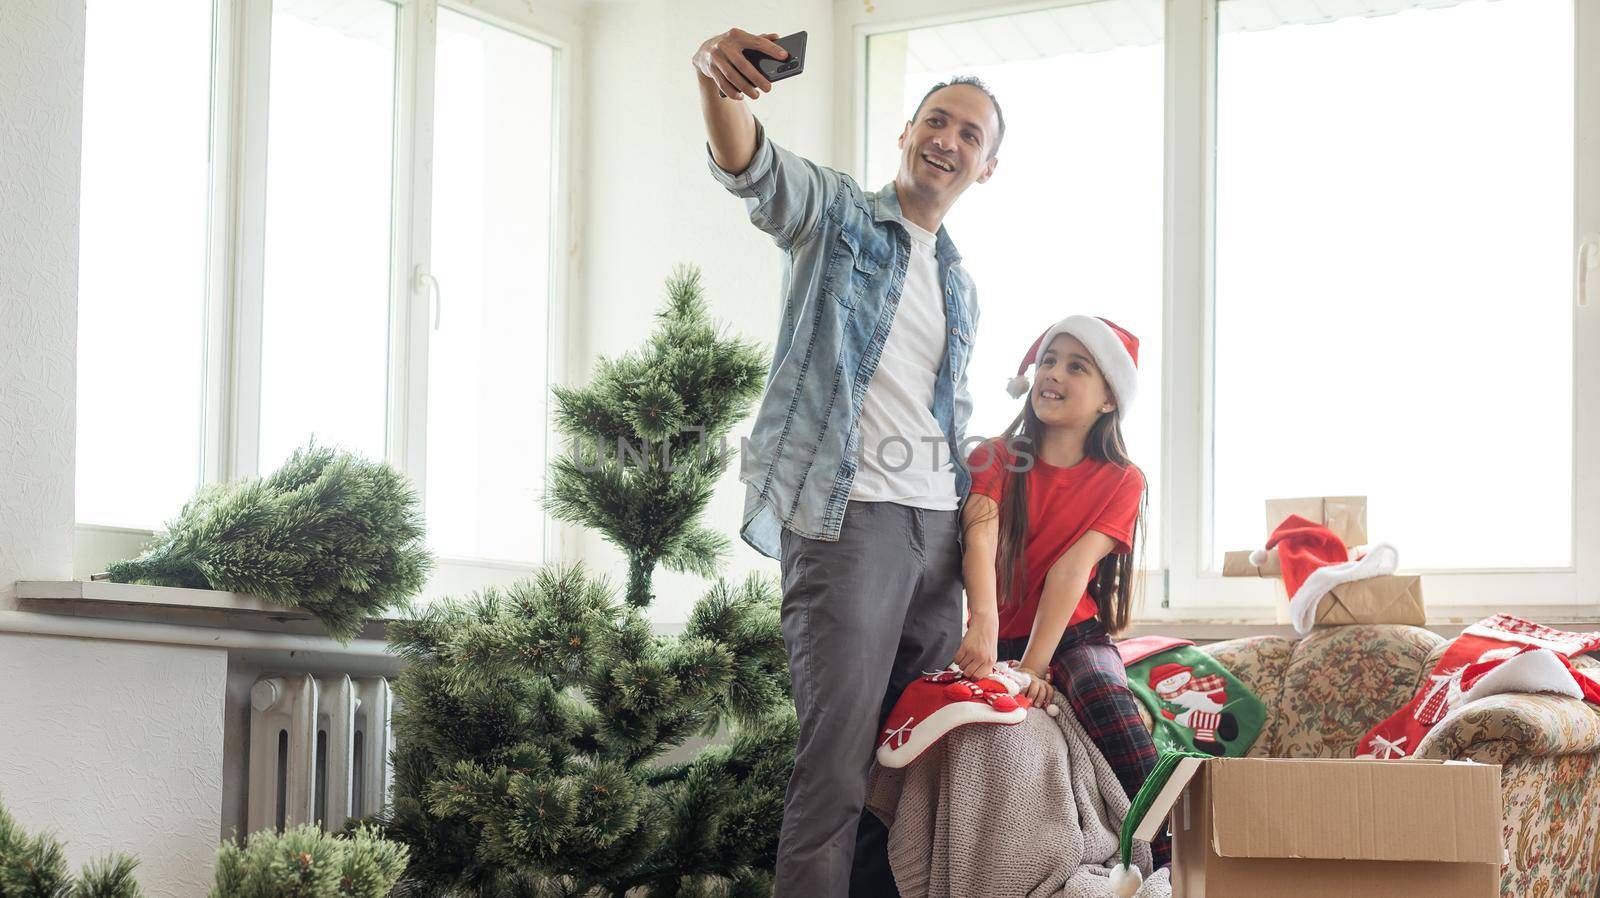 father and daughter install an artificial Christmas tree.